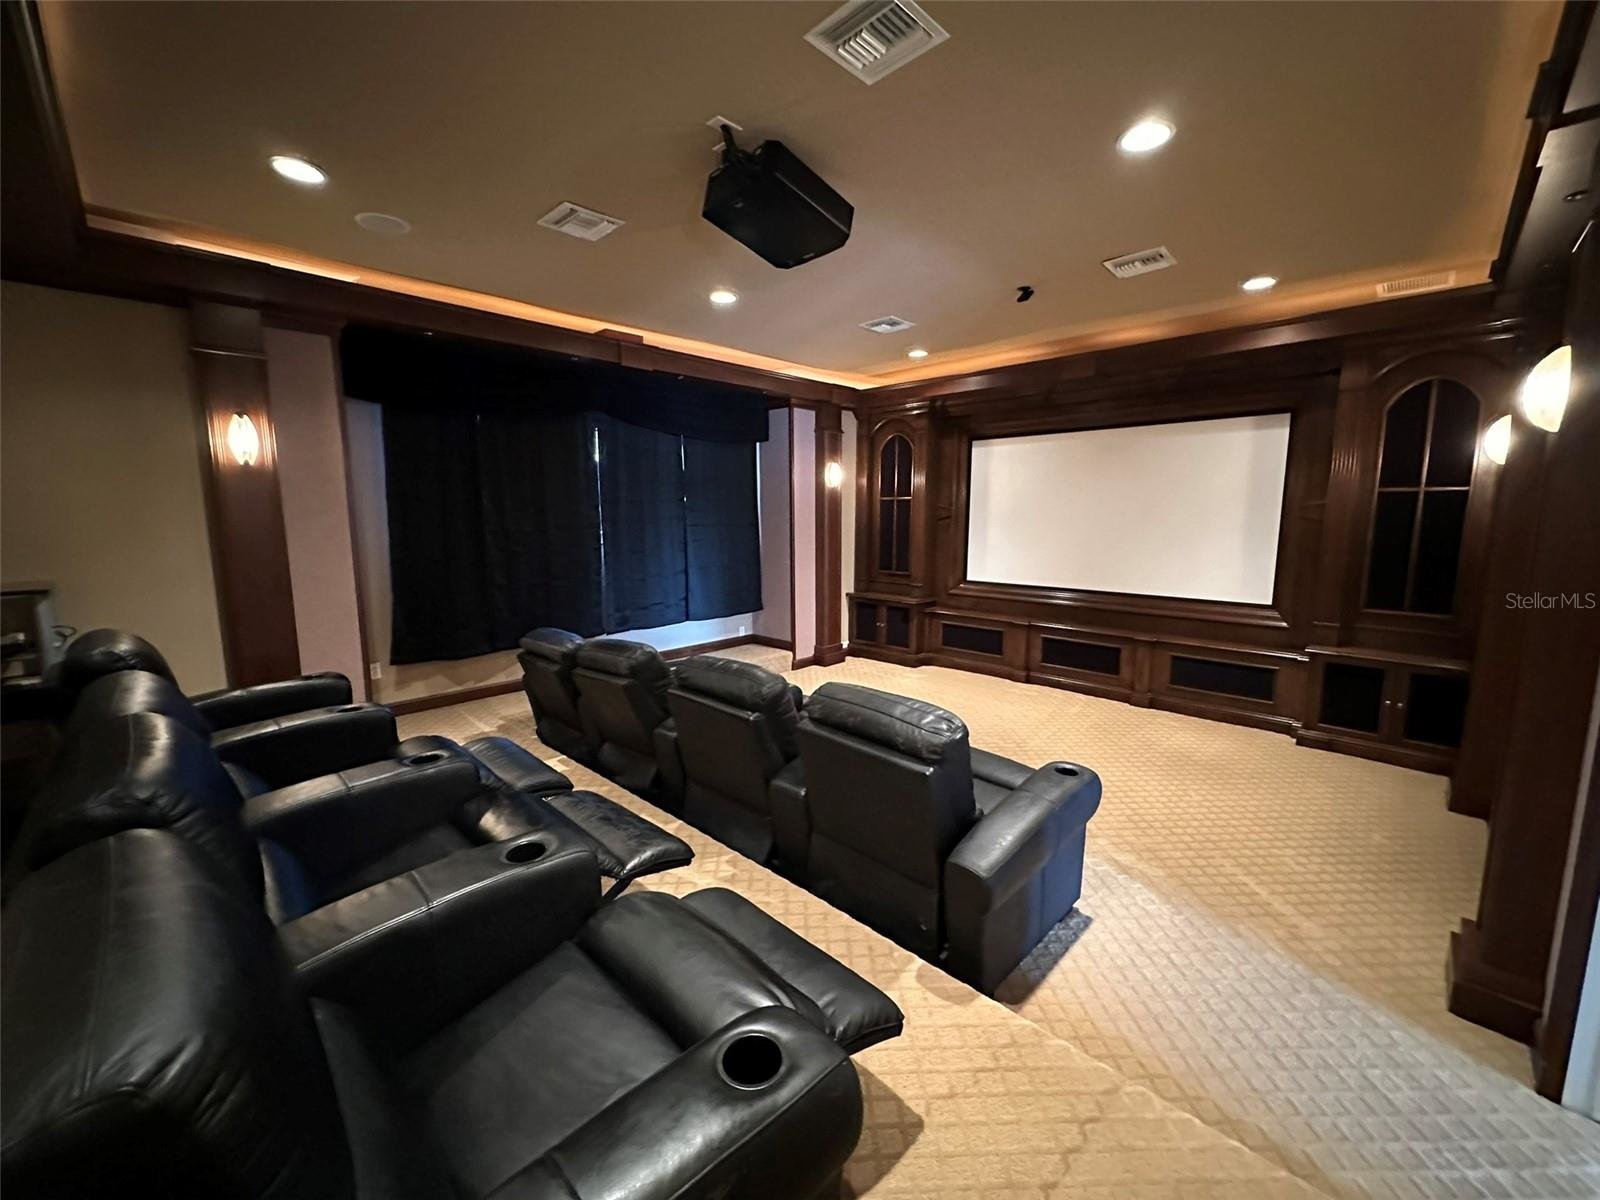 theatre room with reclining black chairs and projector